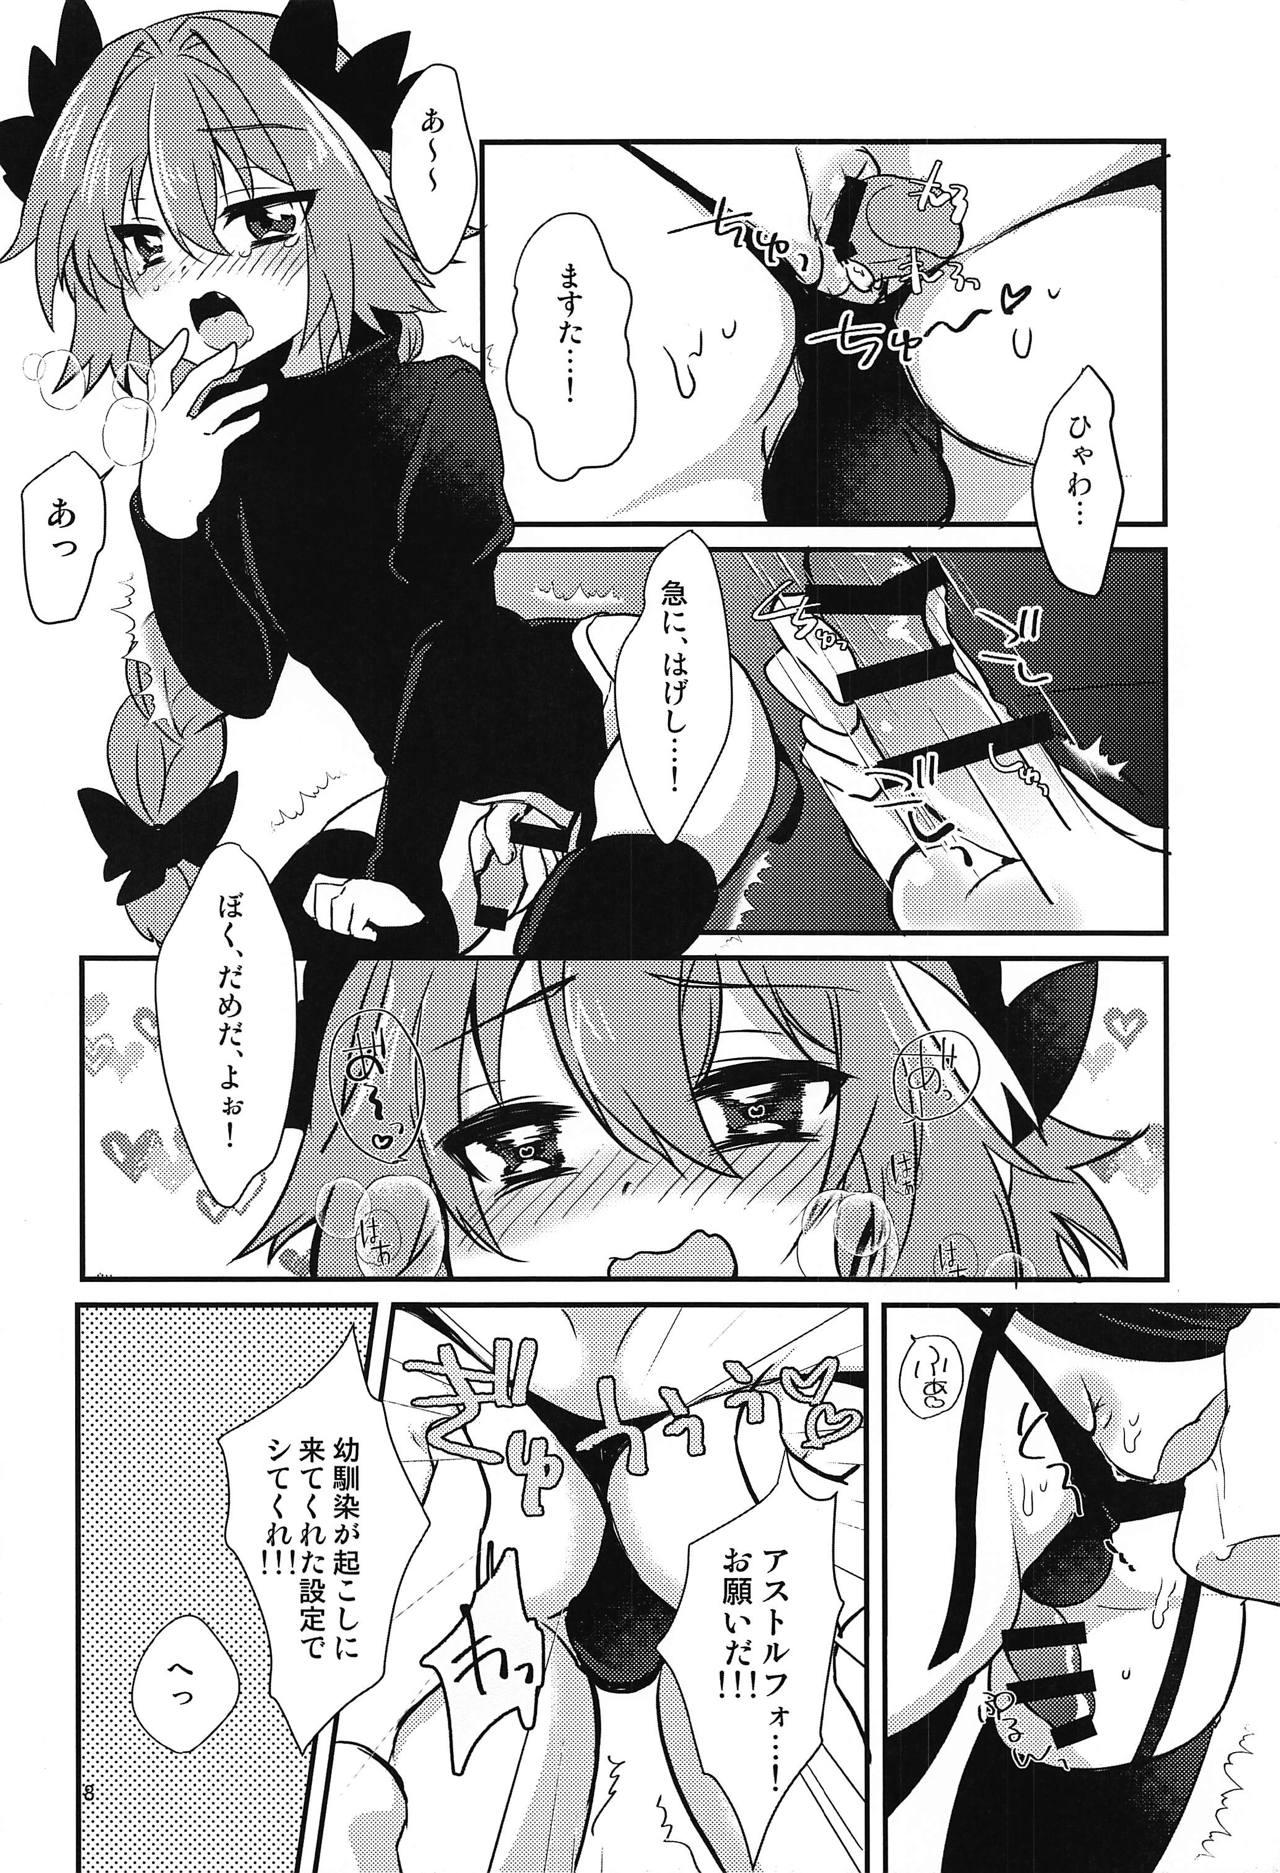 Africa Astolfo to H na Gokko Asobi - Fate grand order Gay Natural - Page 6